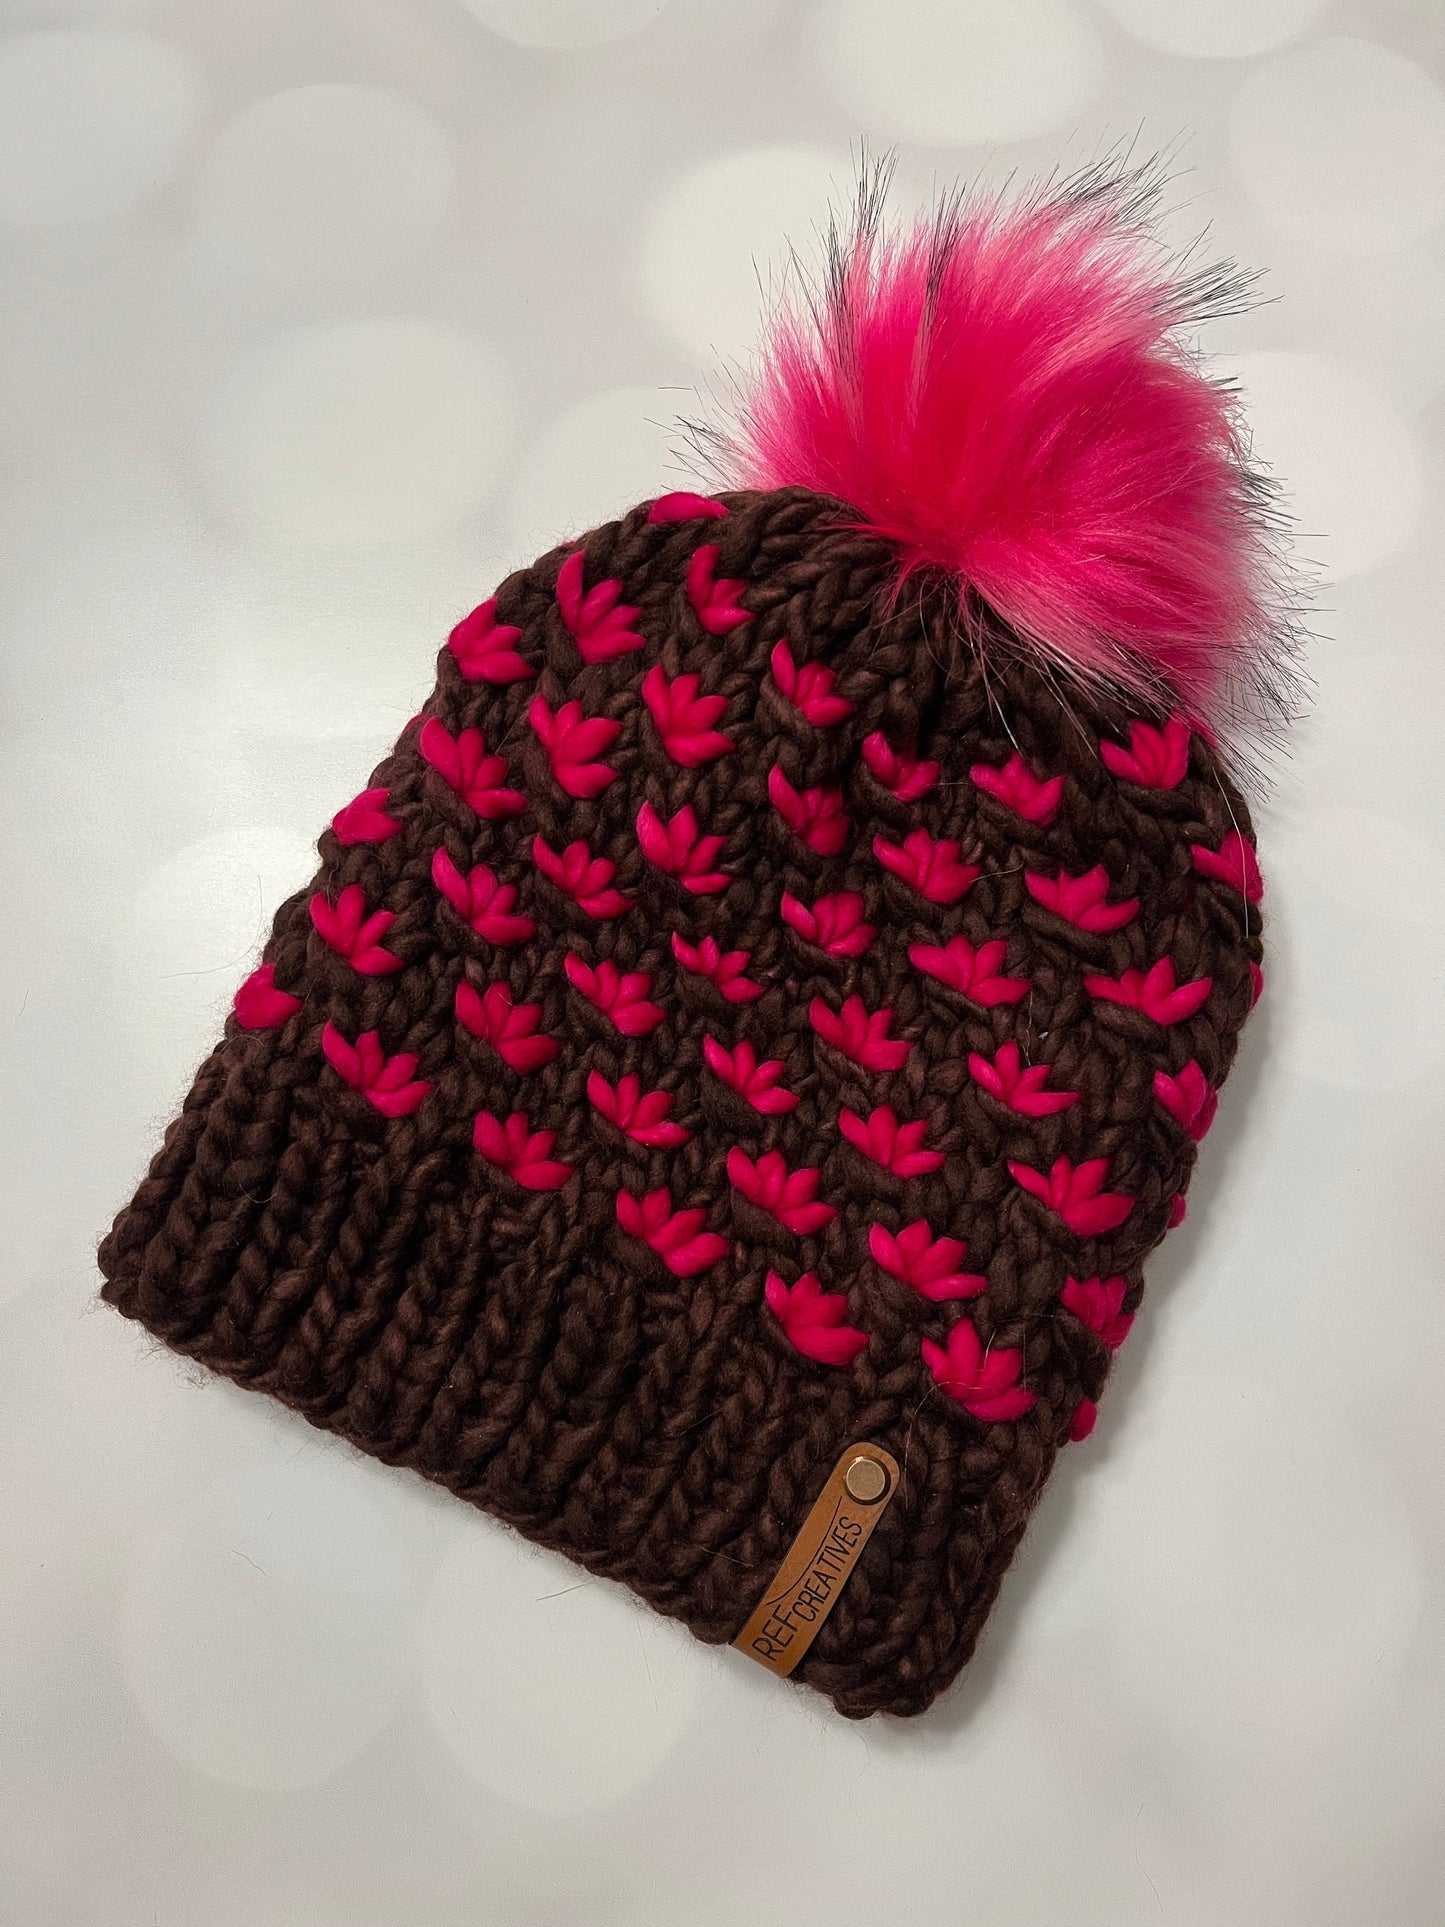 Brown and Pink Lotus Flower Beanie Hand Knit Hat with Hand Dyed Yarn